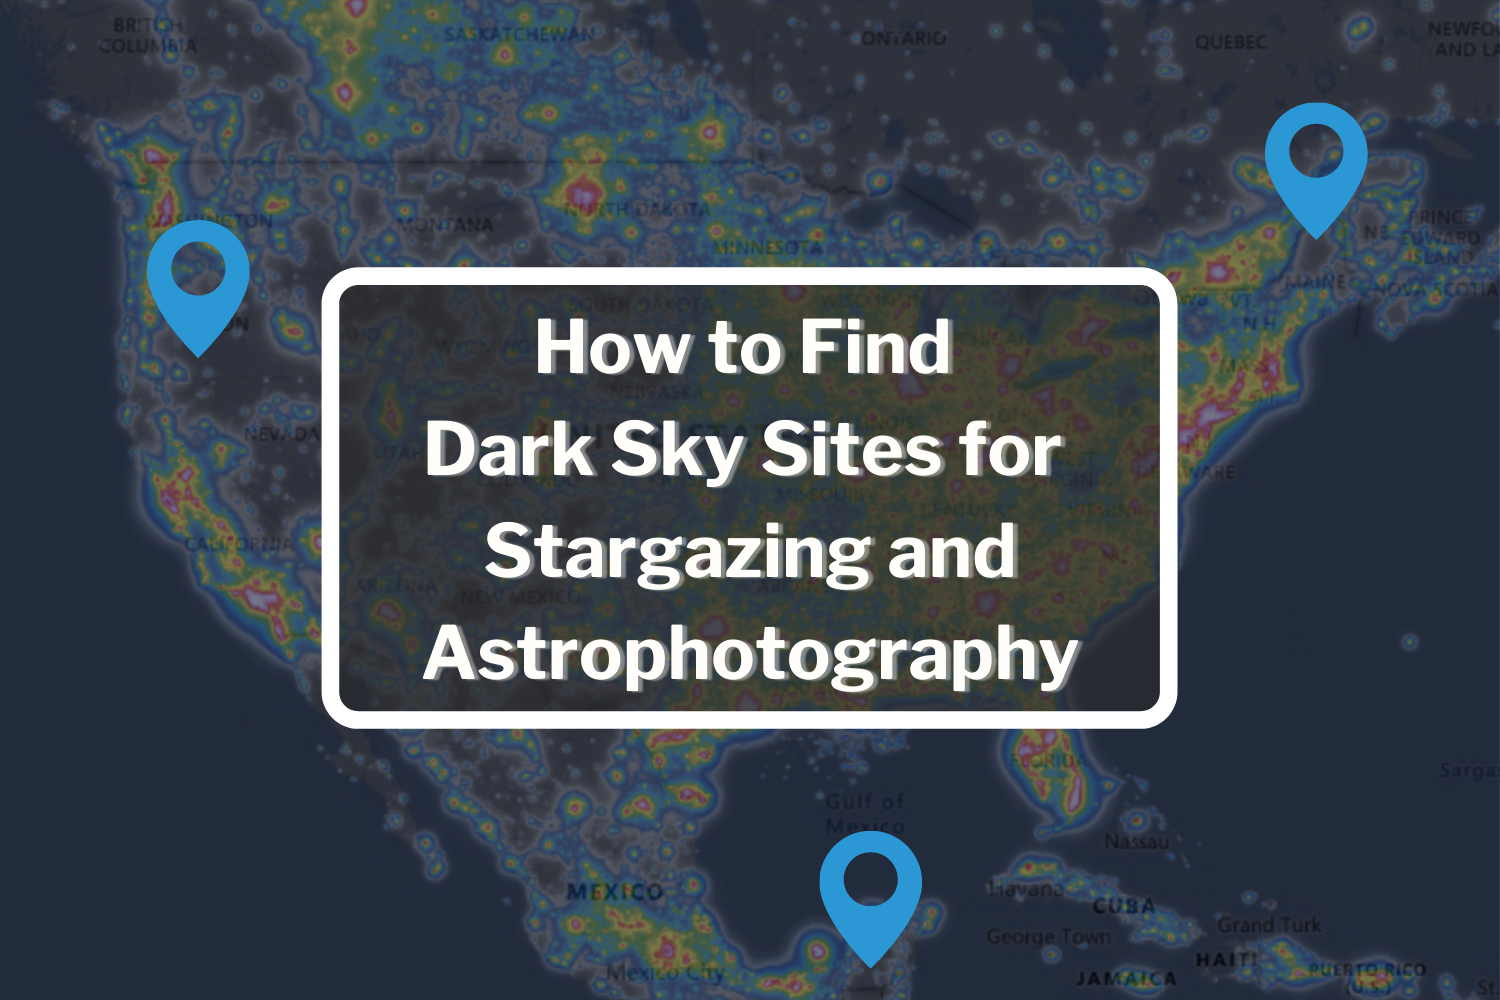 How to Find Dark Sky Sites for Stargazing and Astrophotography